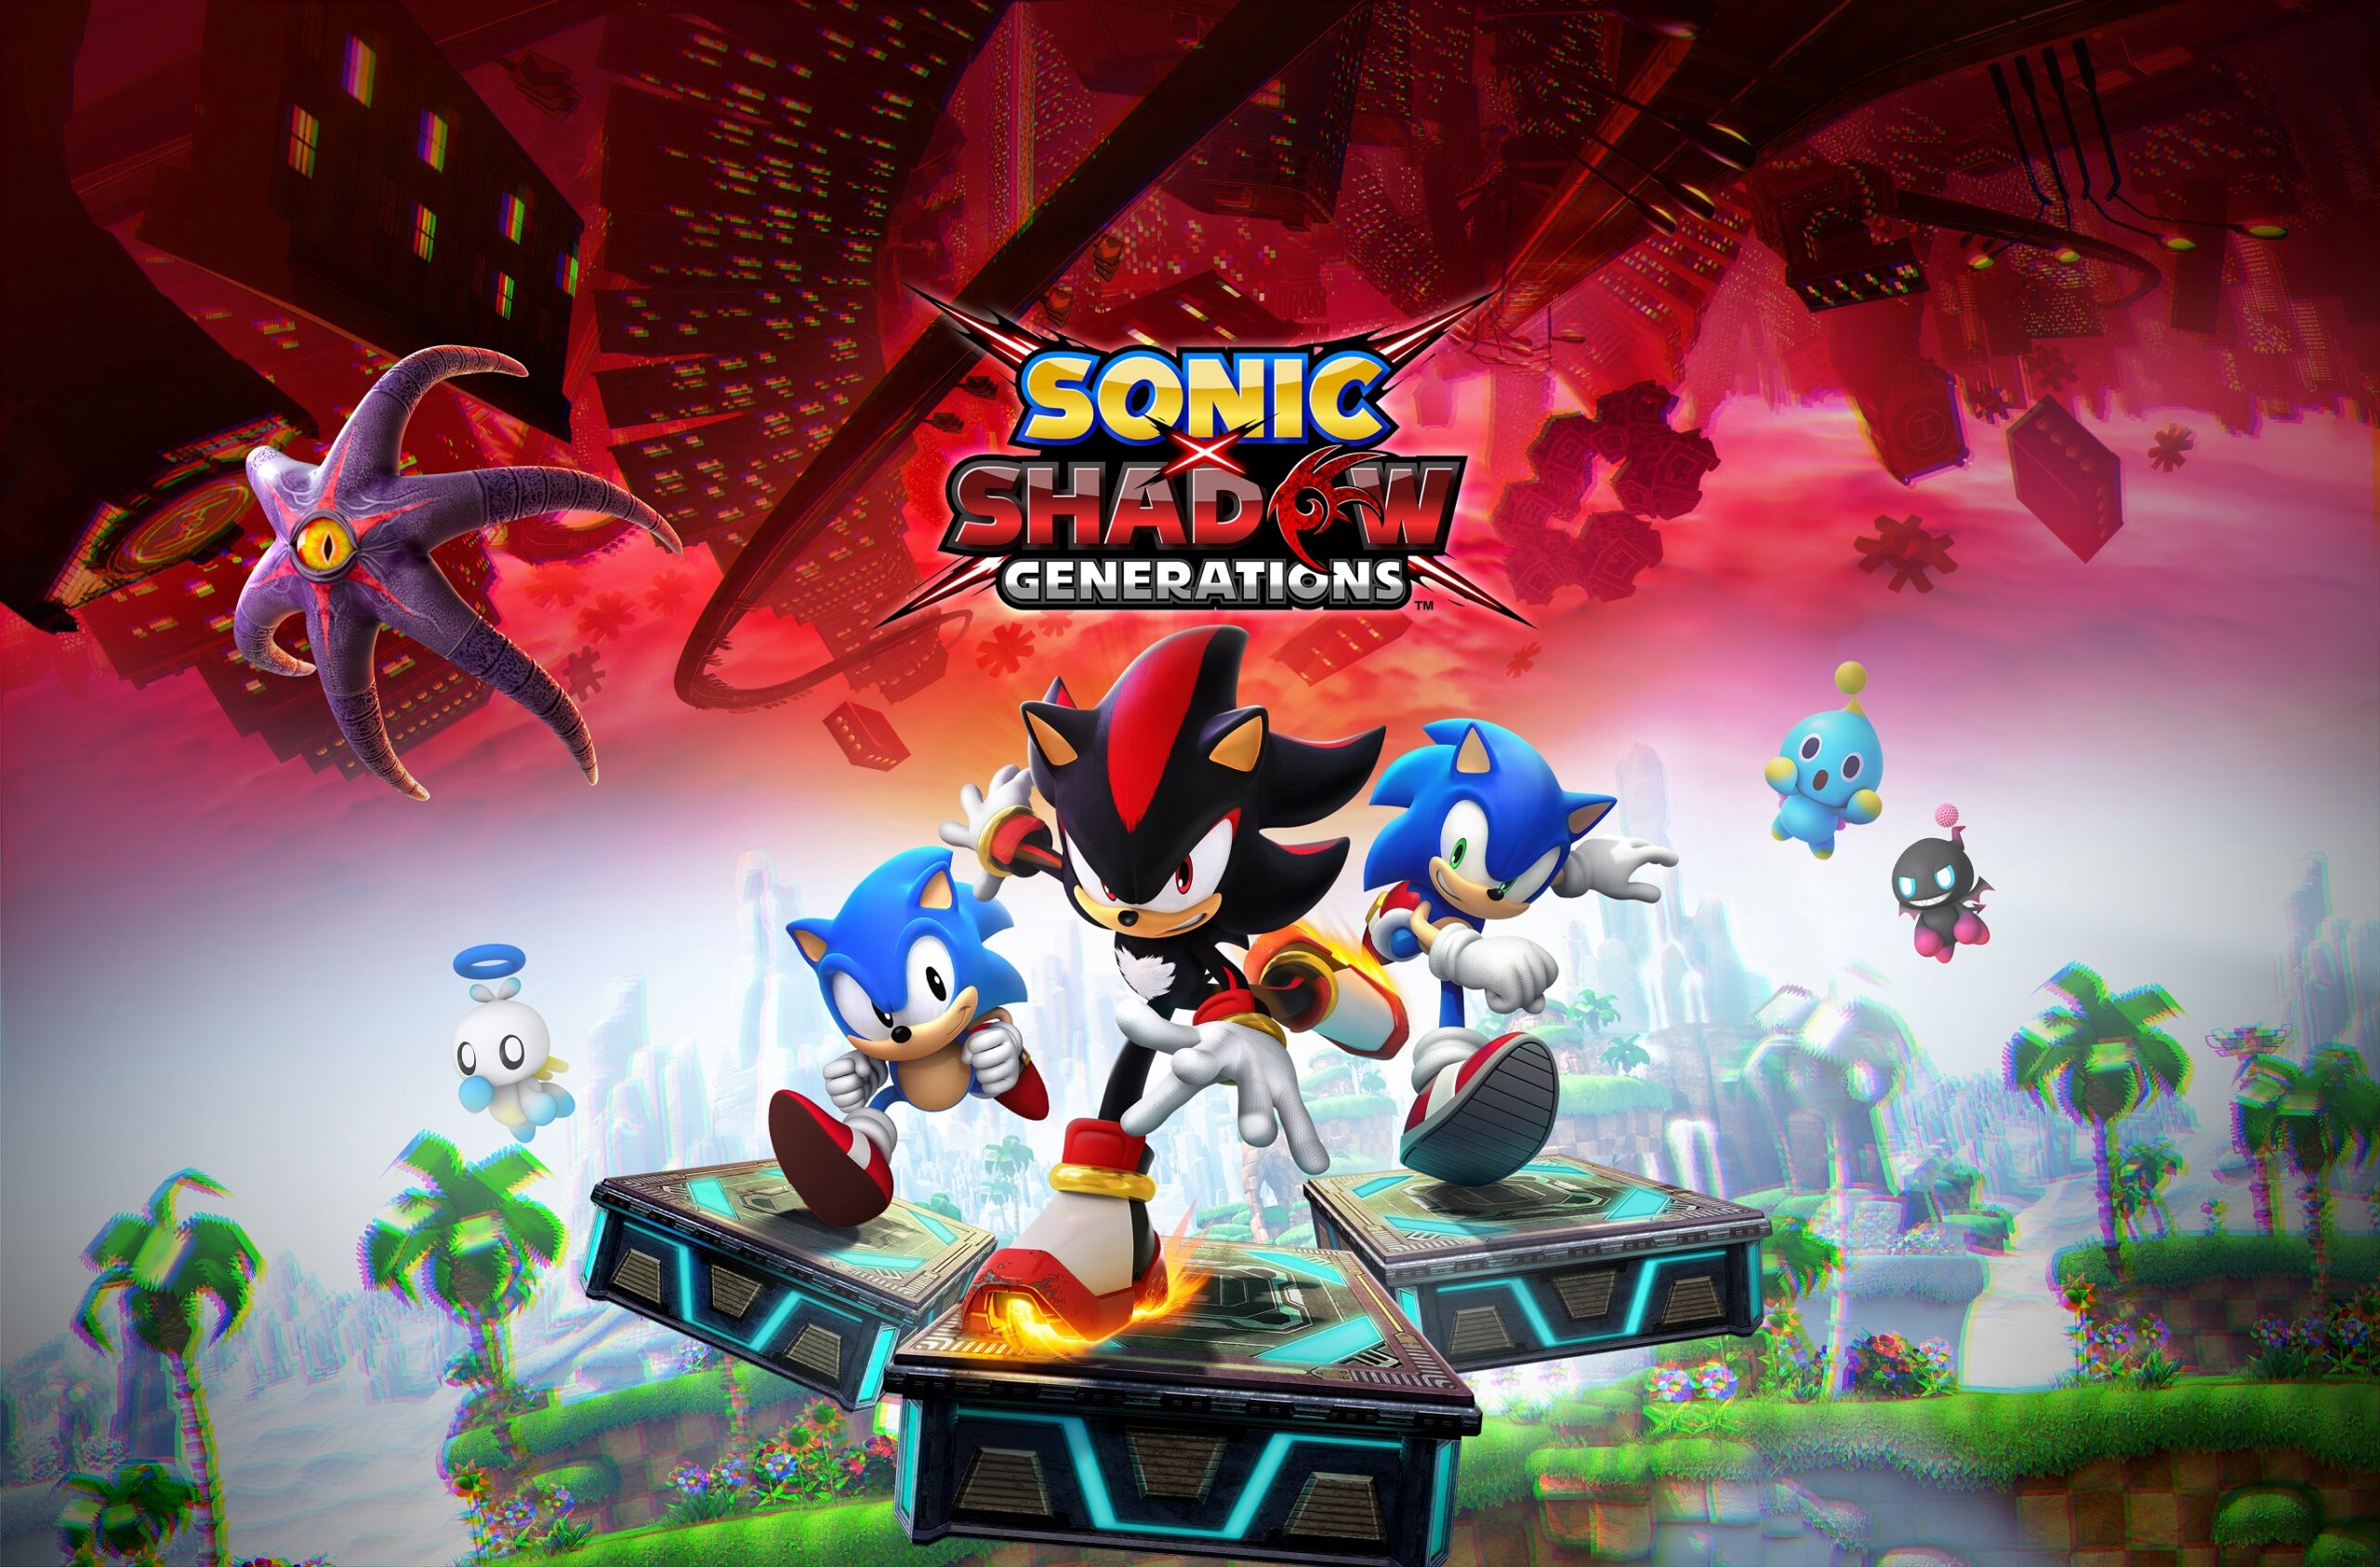 Sonic X Shadow Generations is a new game and a remaster, coming this fall